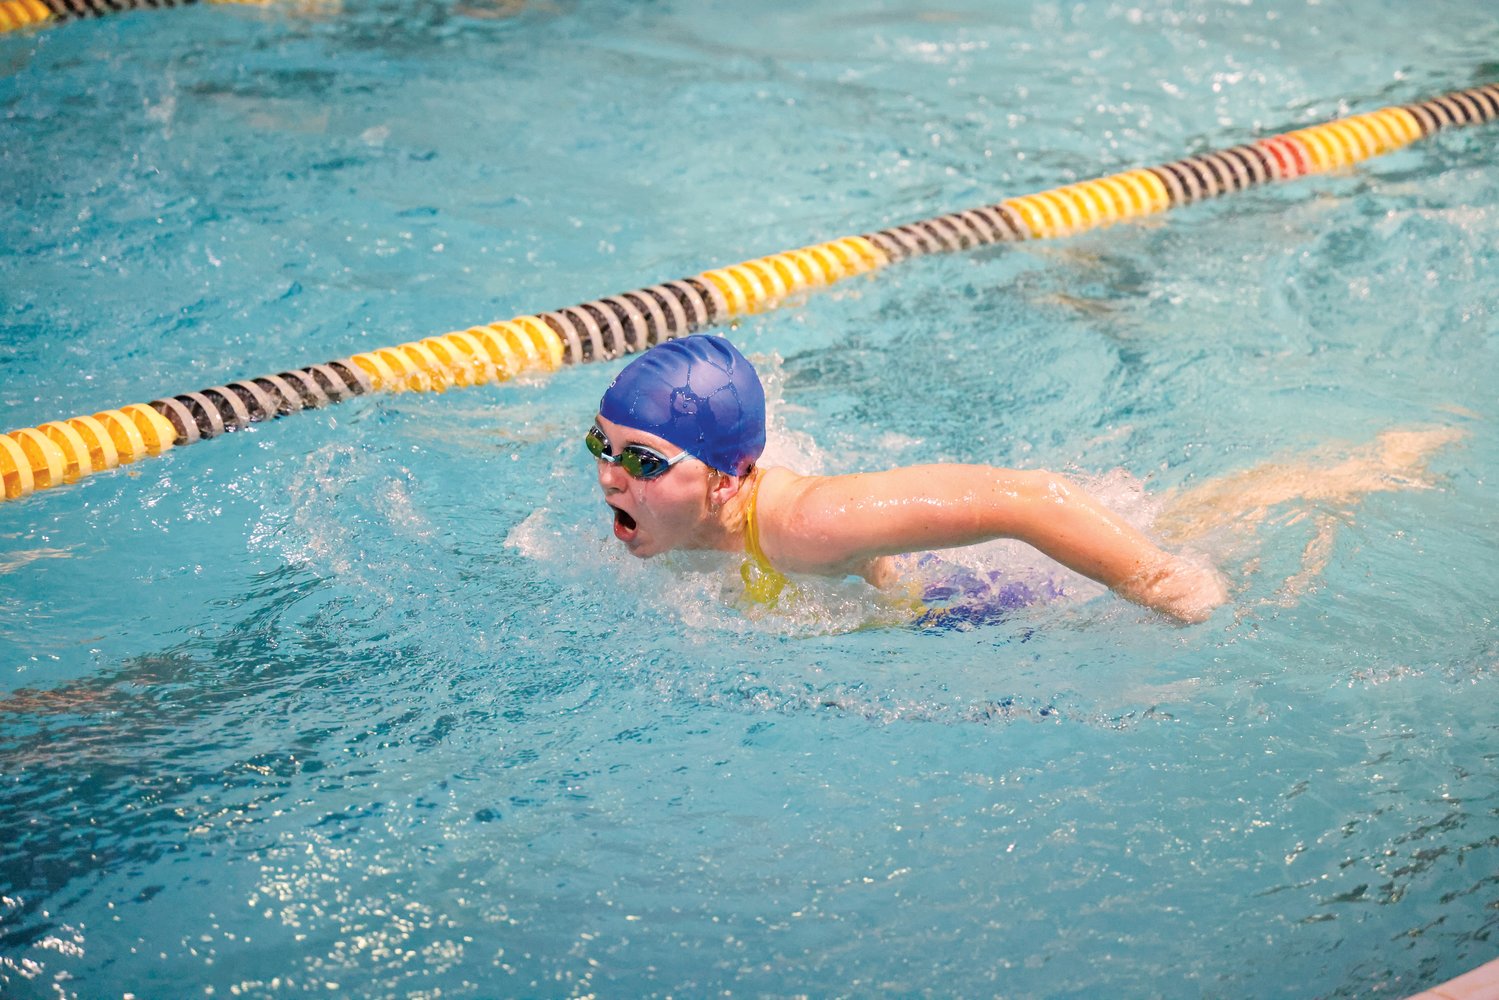 Jordan-Matthews senior Emma Wieber, one of the team's two returning swimmers, races in the women's 100-meter breaststroke at a swim meet in Asheboro last Thursday. She placed 5th in the event with a time of 1:59.01.